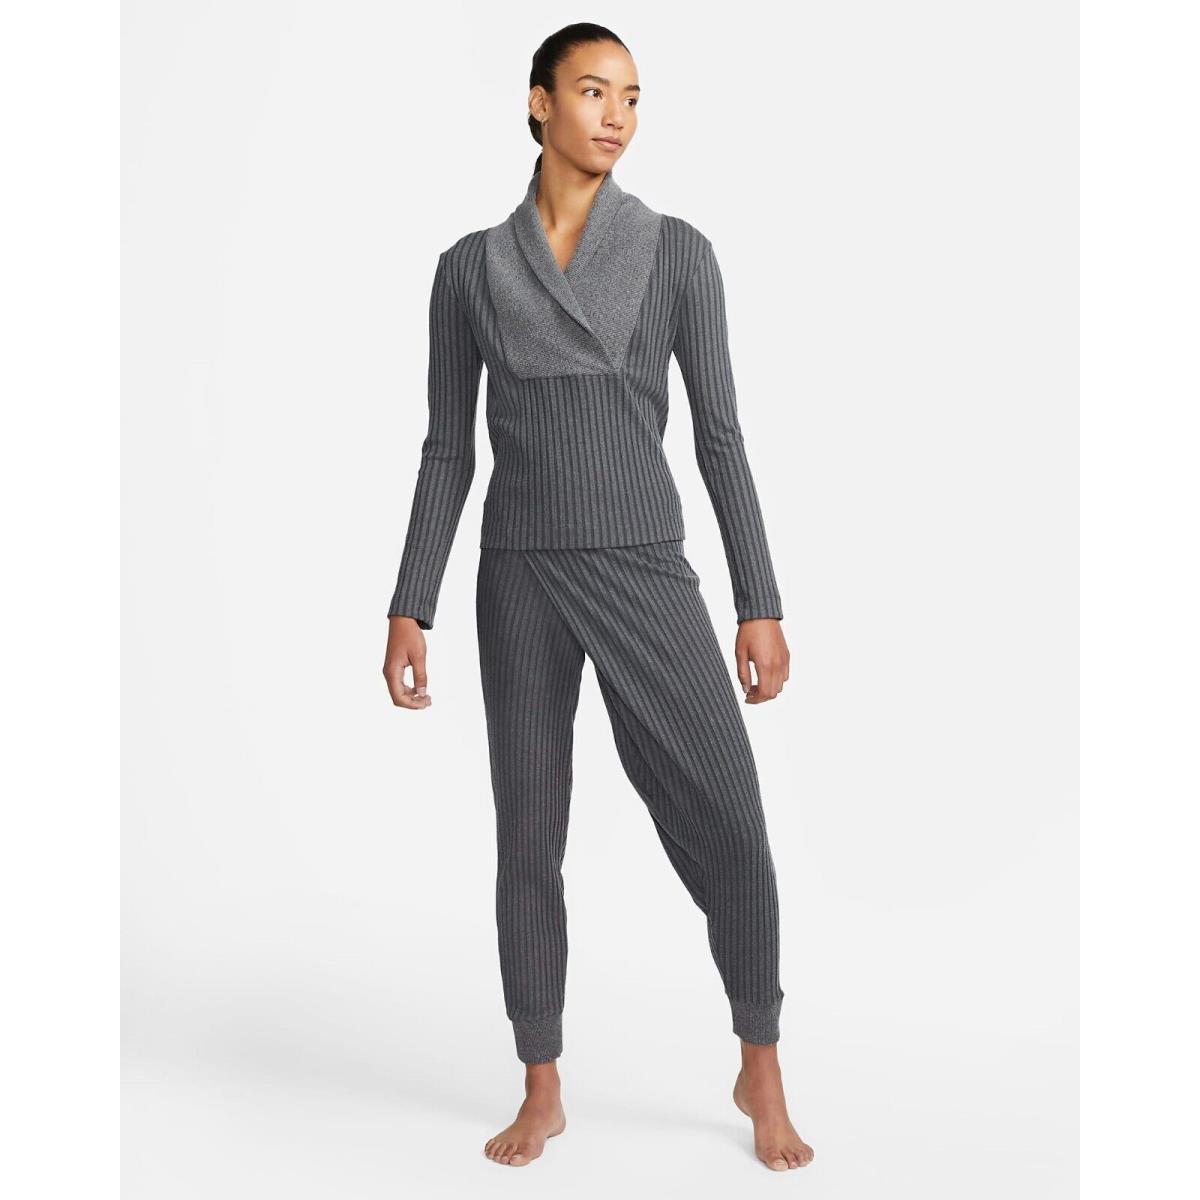 Nike Women`s Yoga XS Set Luxe Premium Extra Soft Ribbed Cover Up Top Pants